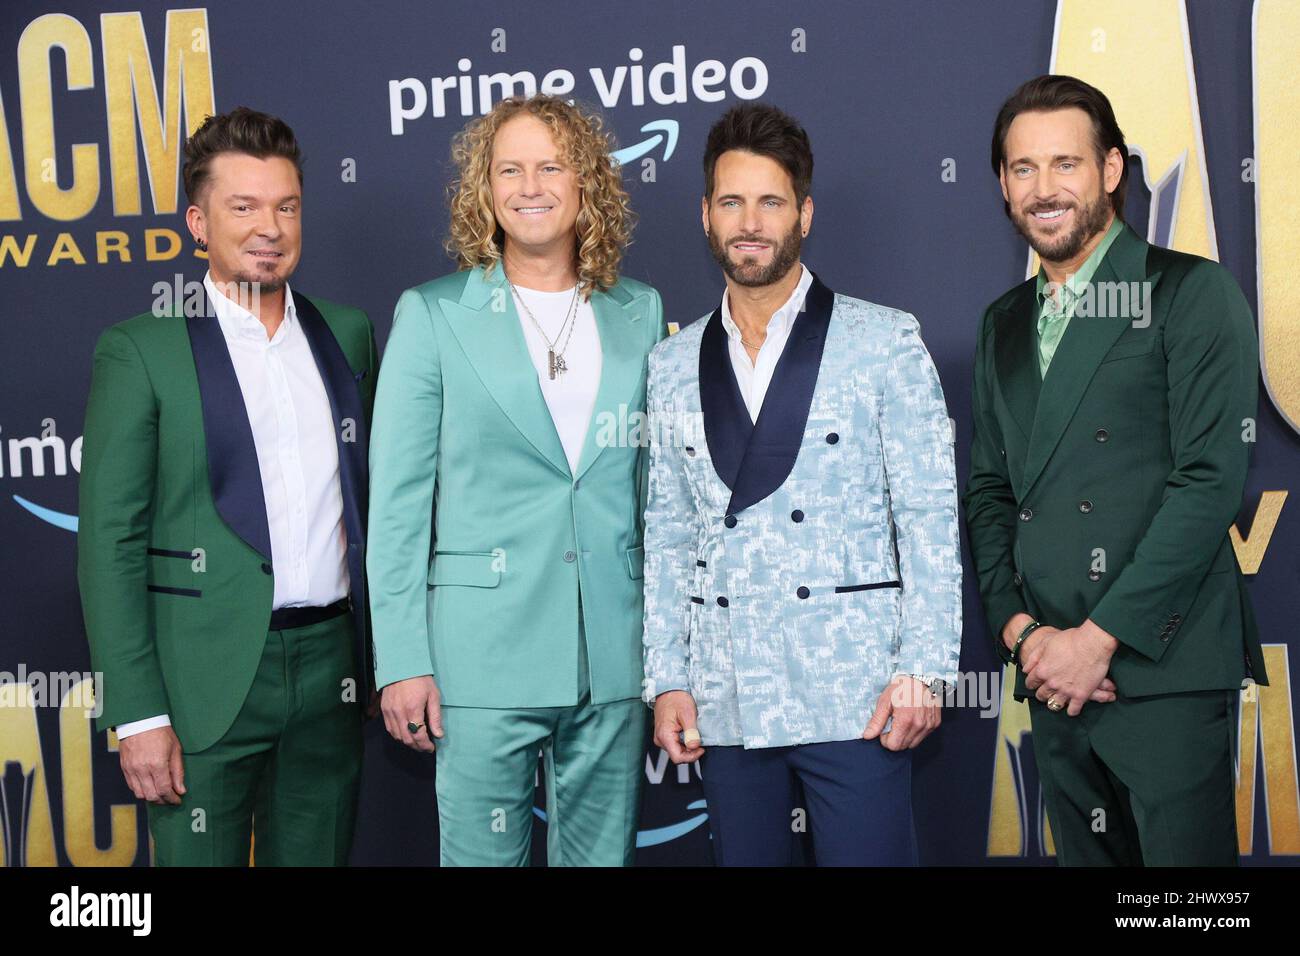 Las Vegas, NV, USA. 7th Mar, 2022. Parmalee at arrivals for 57th Academy of Country Music (ACM) Awards - Arrivals 1, Allegiant Stadium, Las Vegas, NV March 7, 2022. Credit: JA/Everett Collection/Alamy Live News Stock Photo